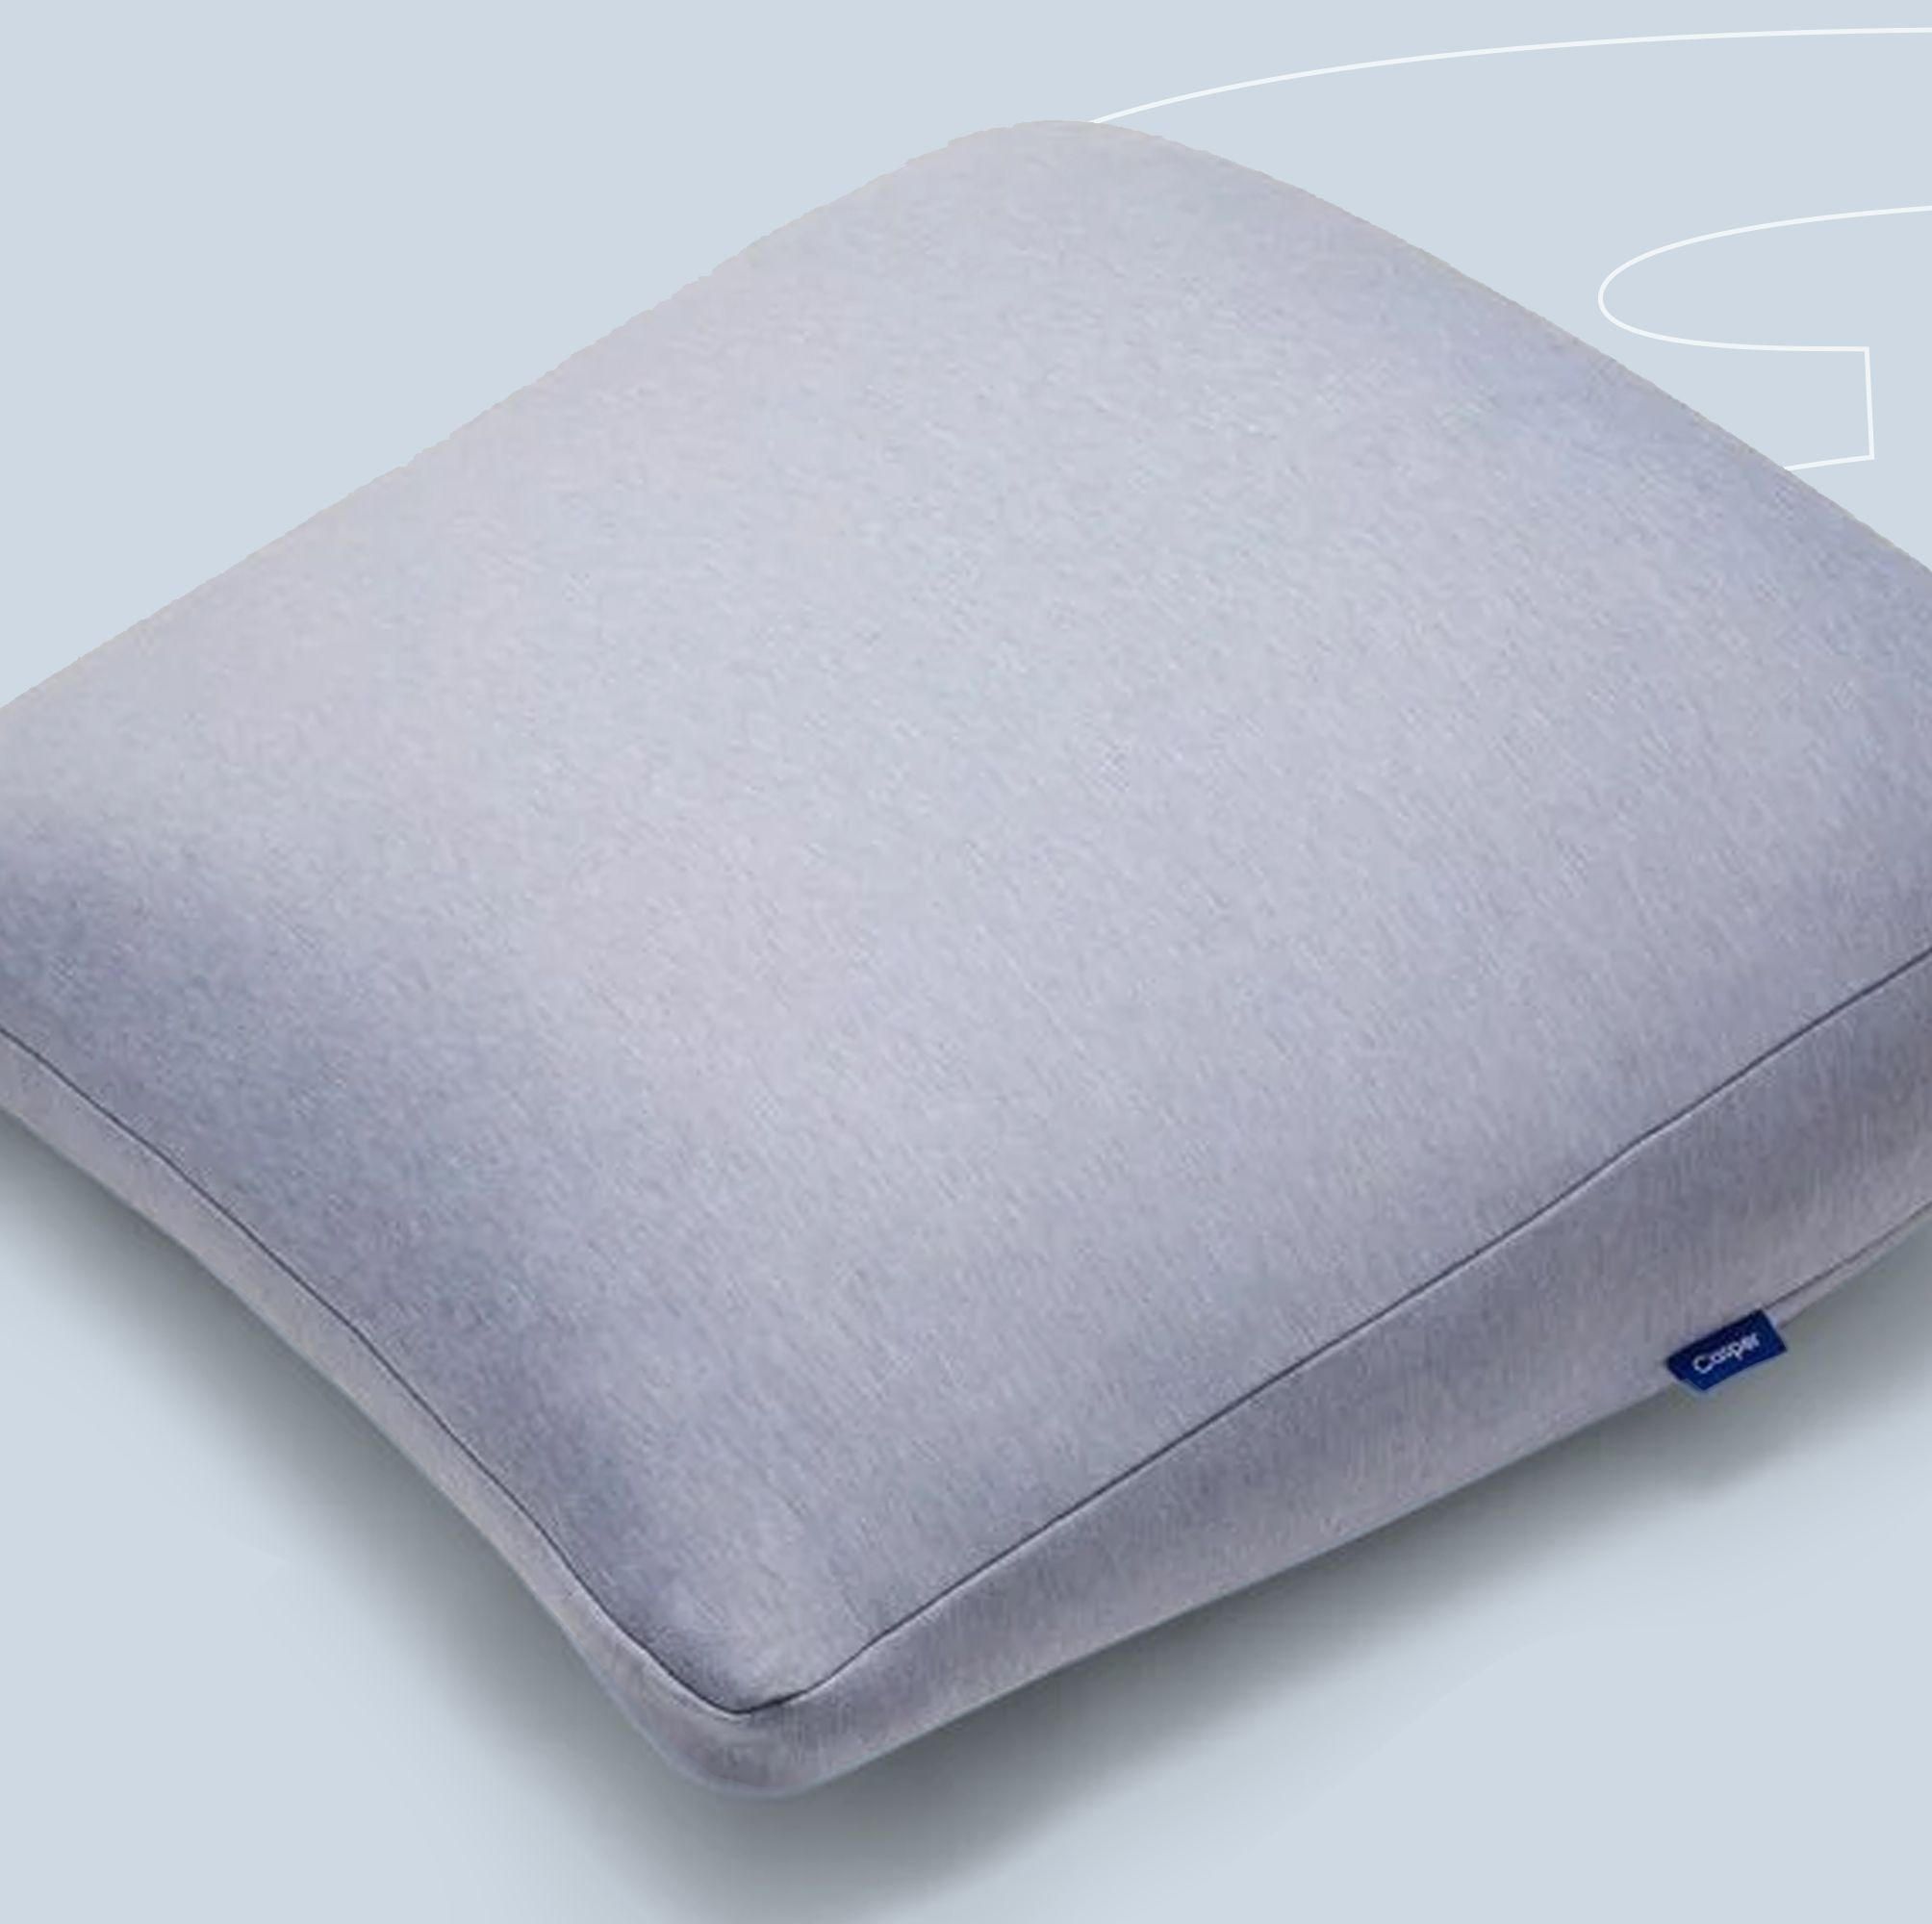 6 Pillows to Quell Your Snoring